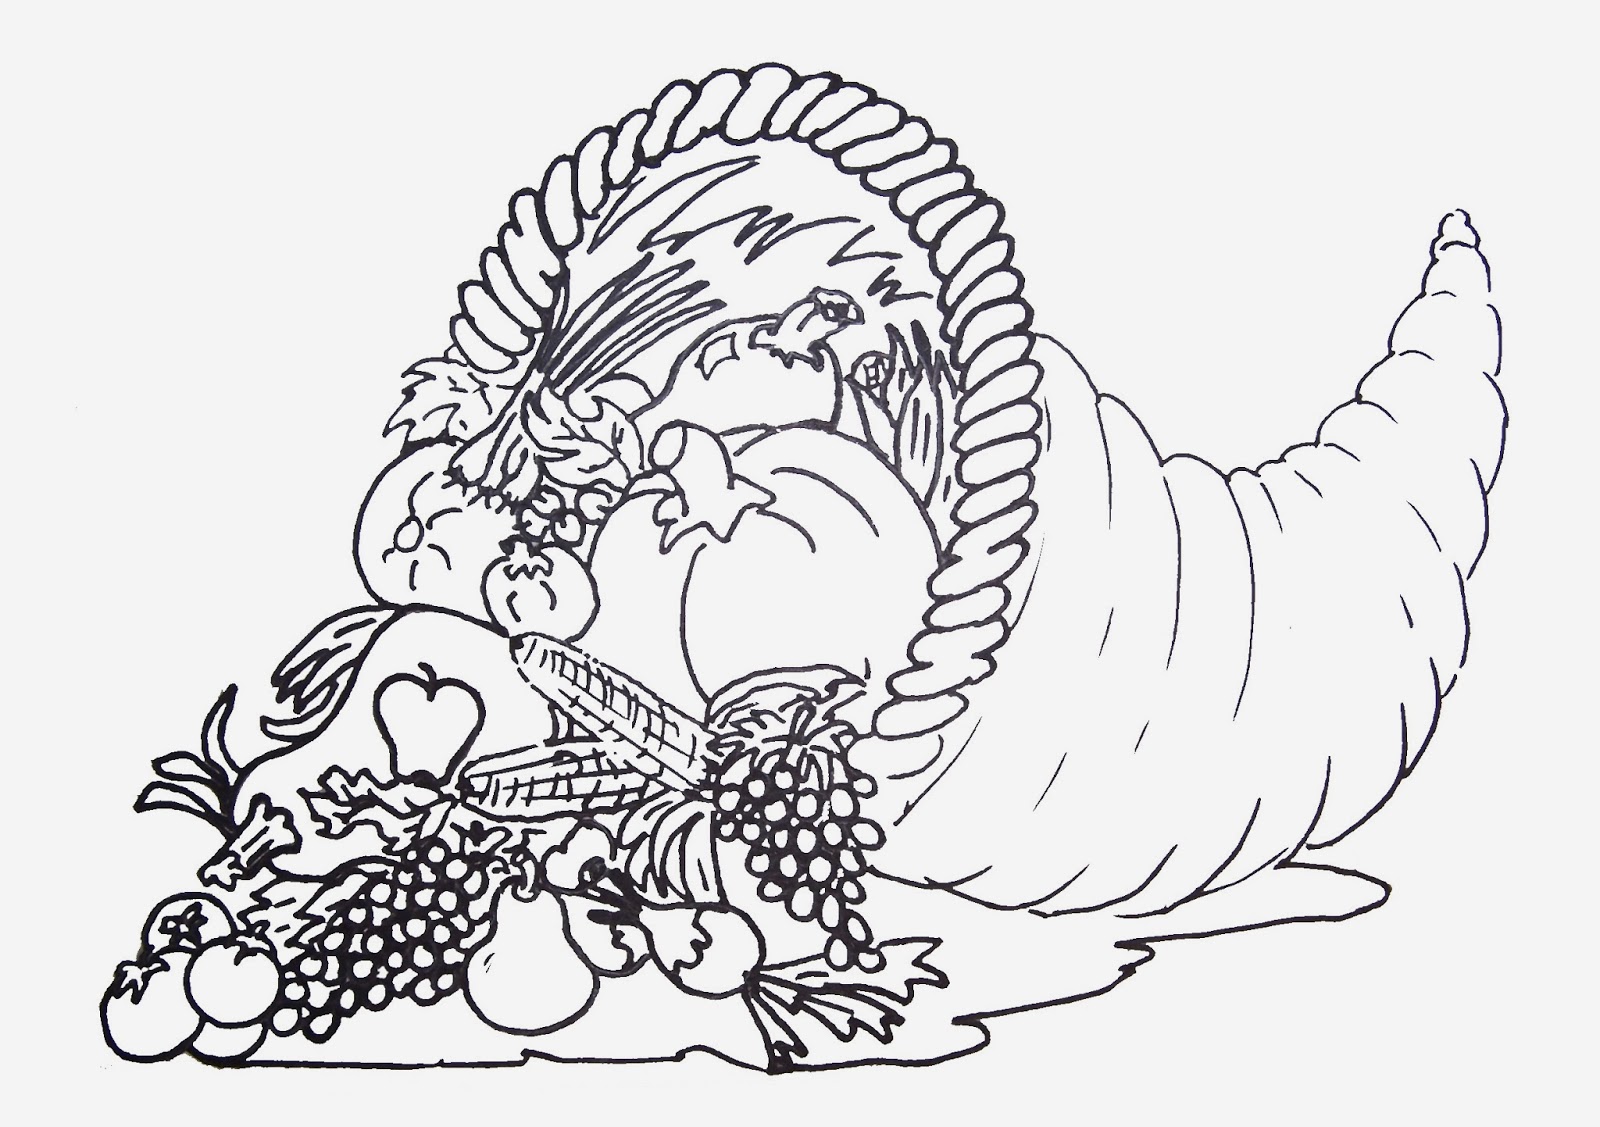 Cornucopia coloring pages to download and print for free